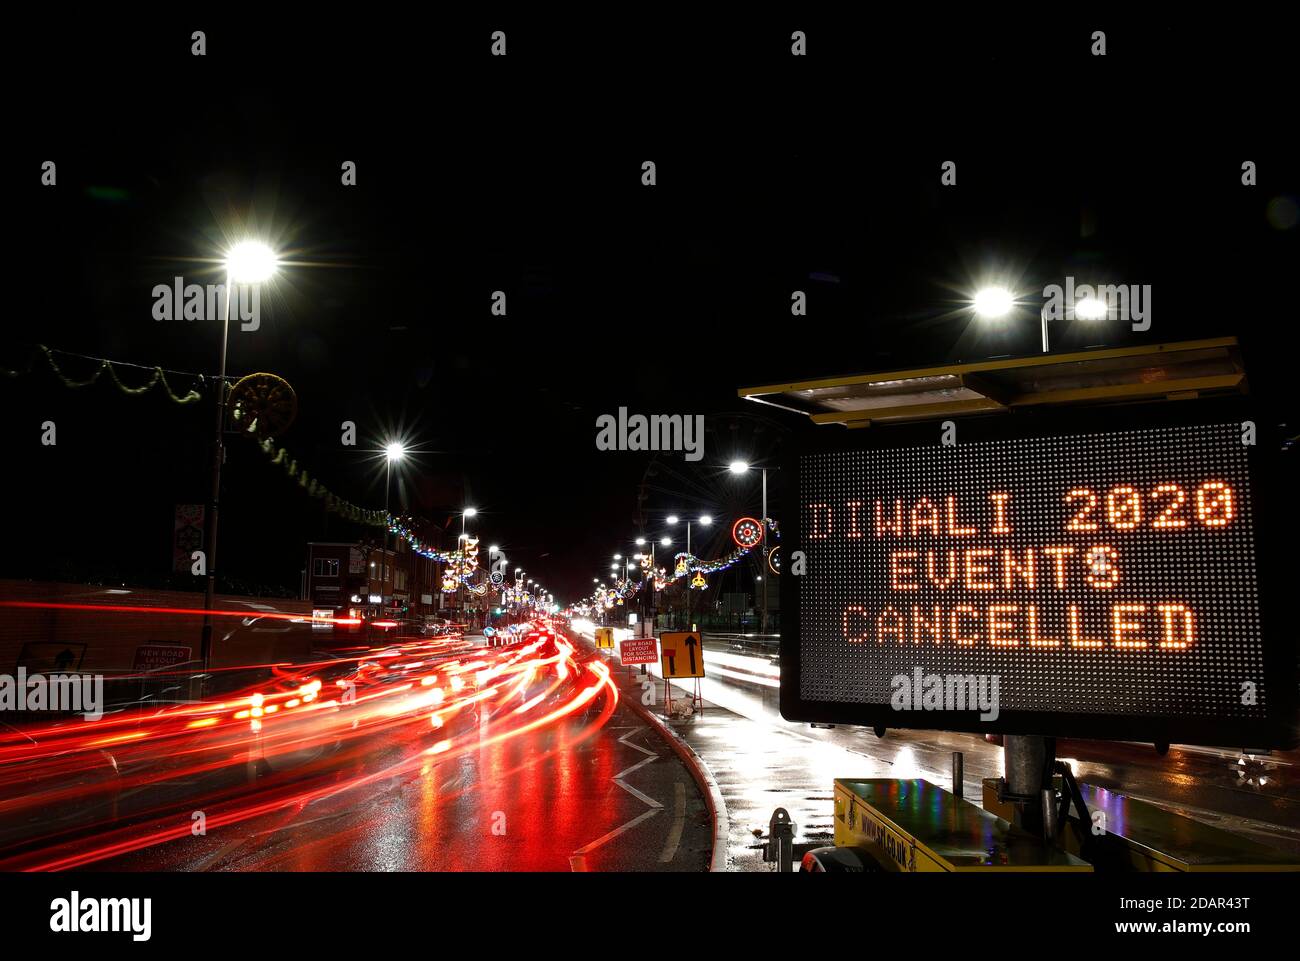 Leicester, Leicestershire, UK. 14th November 2020. Cars stream past a warning sign on the Golden Mile after Covid-19 restrictions meant the usual Diwali day ceremony and celebrations were cancelled this year. Credit Darren Staples/Alamy Live News. Stock Photo